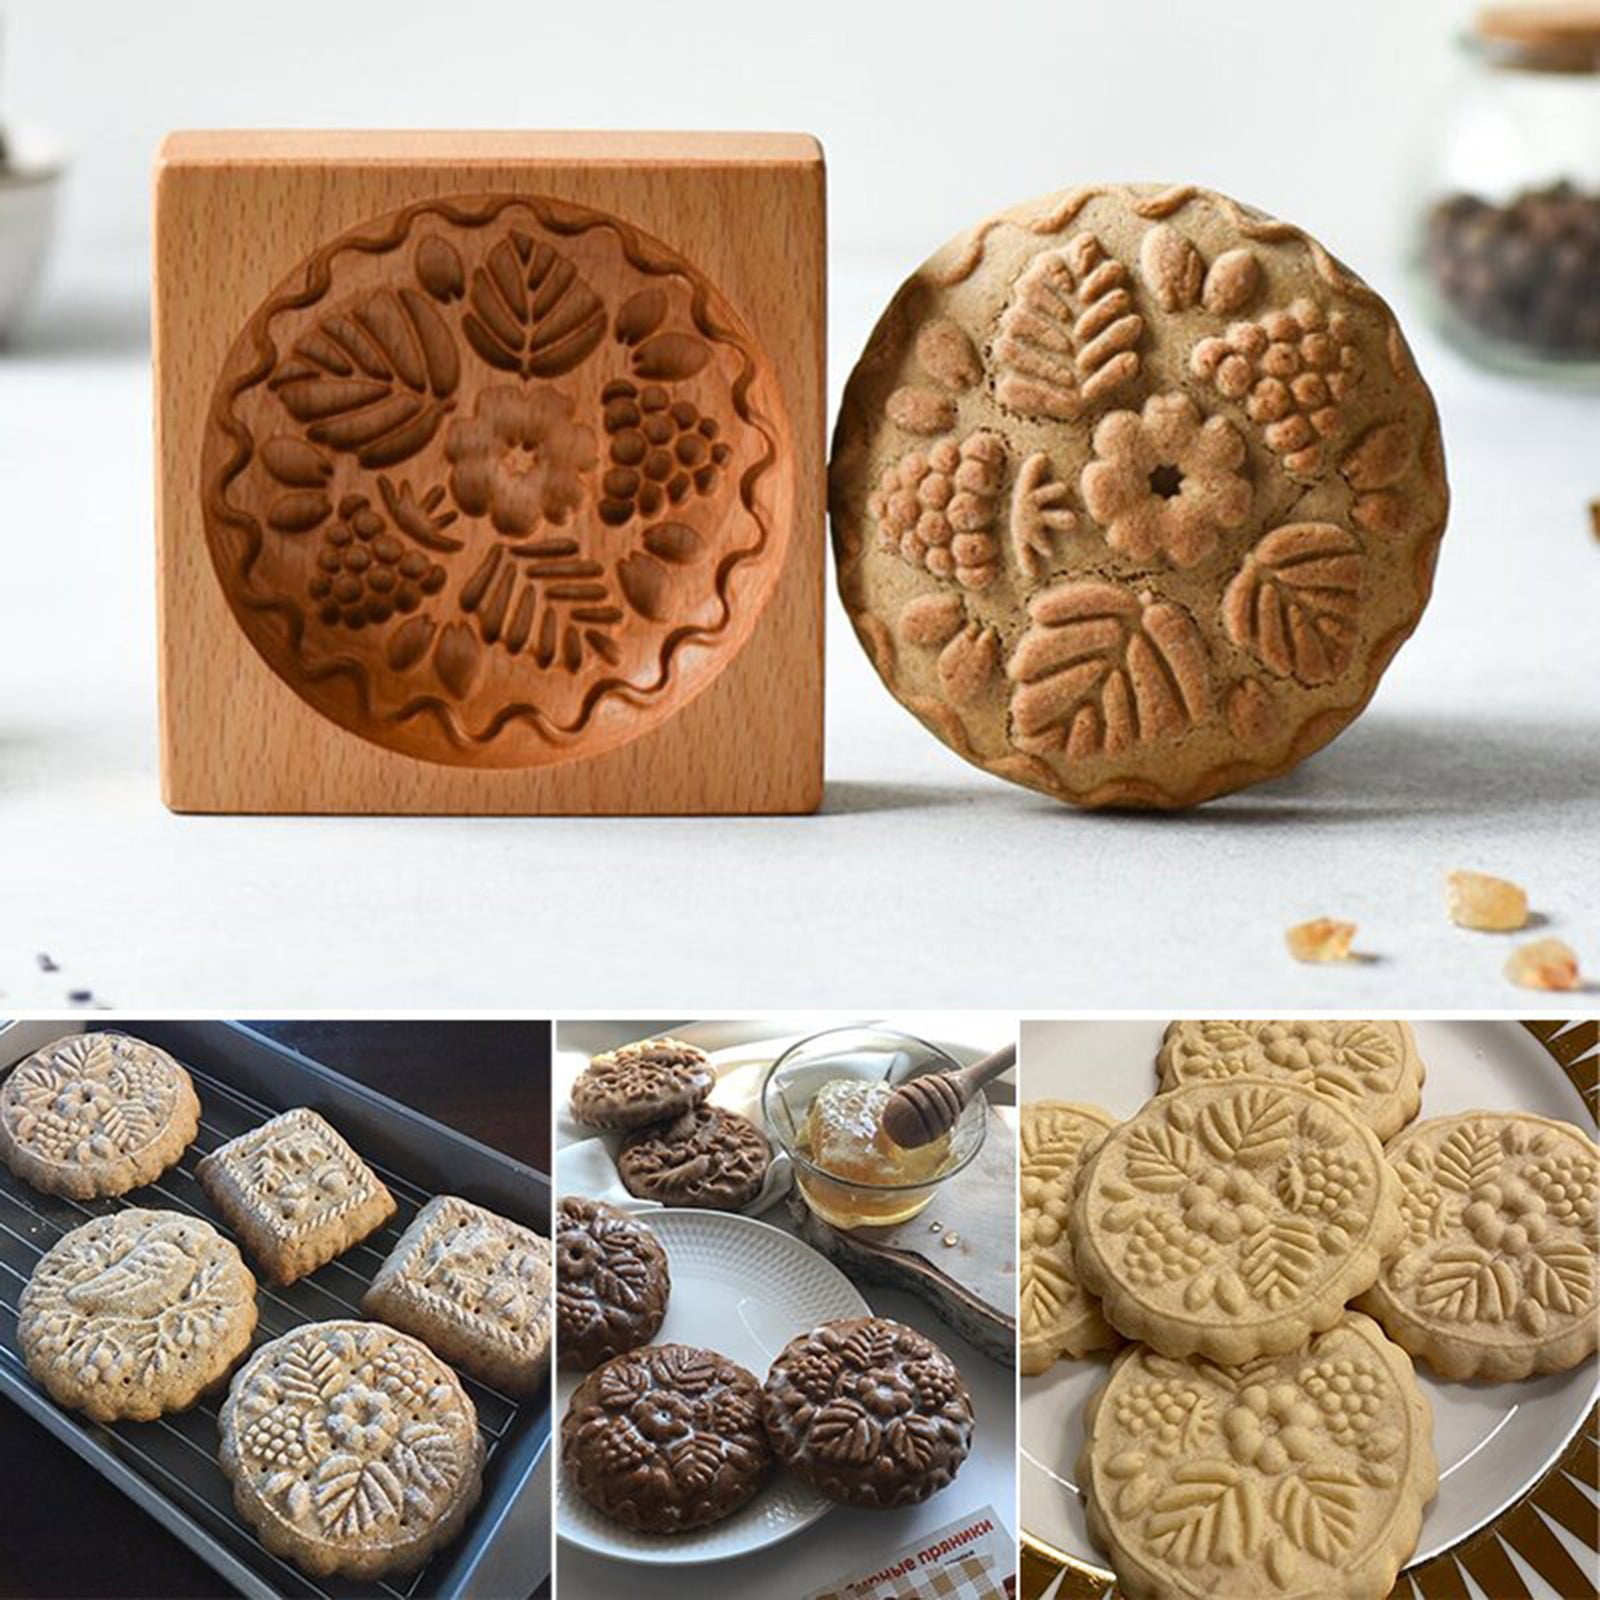 Raspberry Shortbread Mold-Carved Wood Gingerbread Biscuits Shortbread Mold